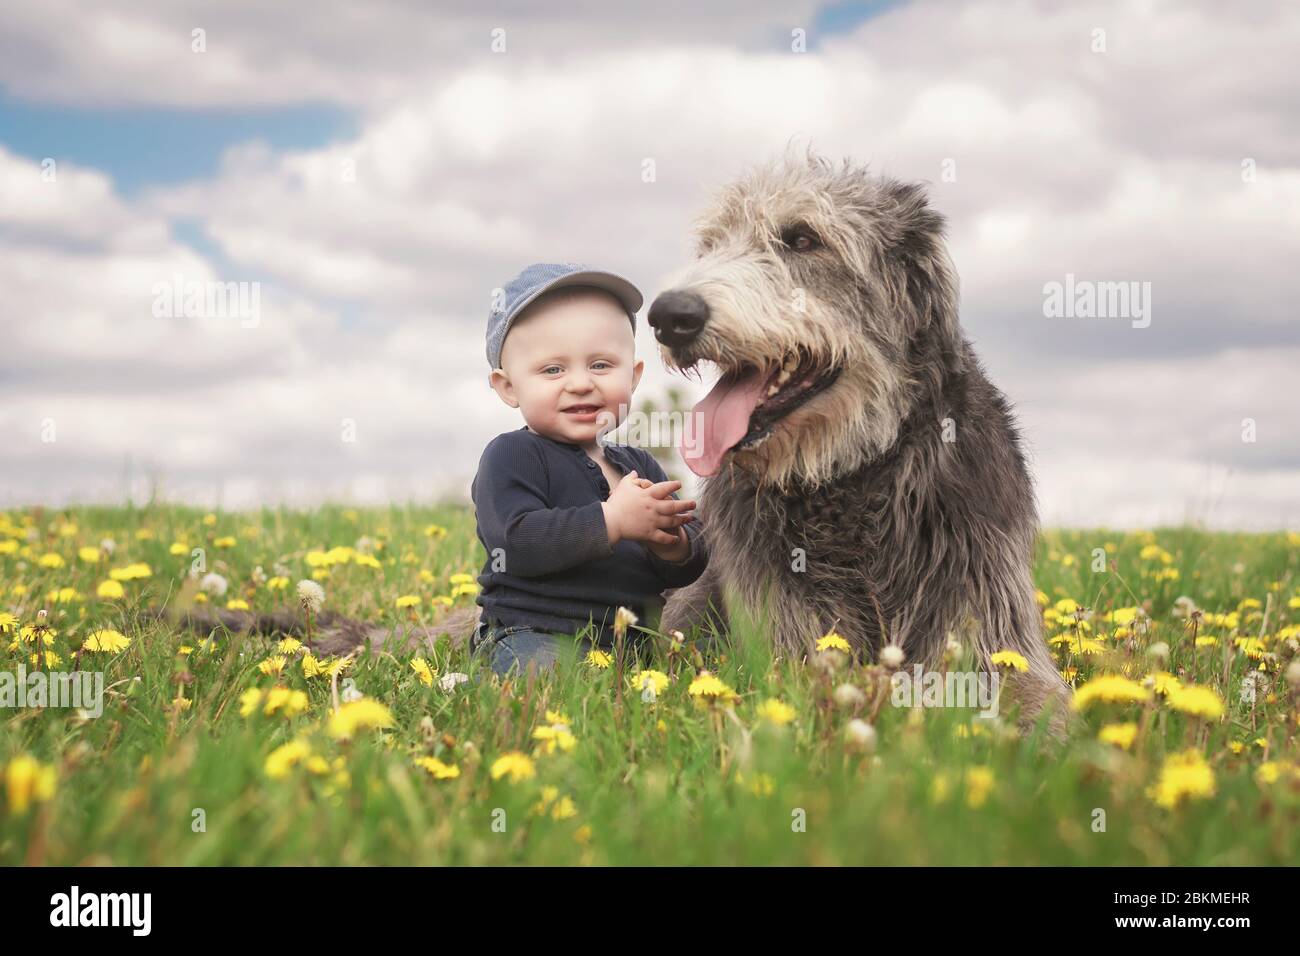 A little Caucasian baby boy in a baseball cap sits next to his big Irish wolfhound friend in a meadow full of blooming dandelions with a cloudy sky in Stock Photo